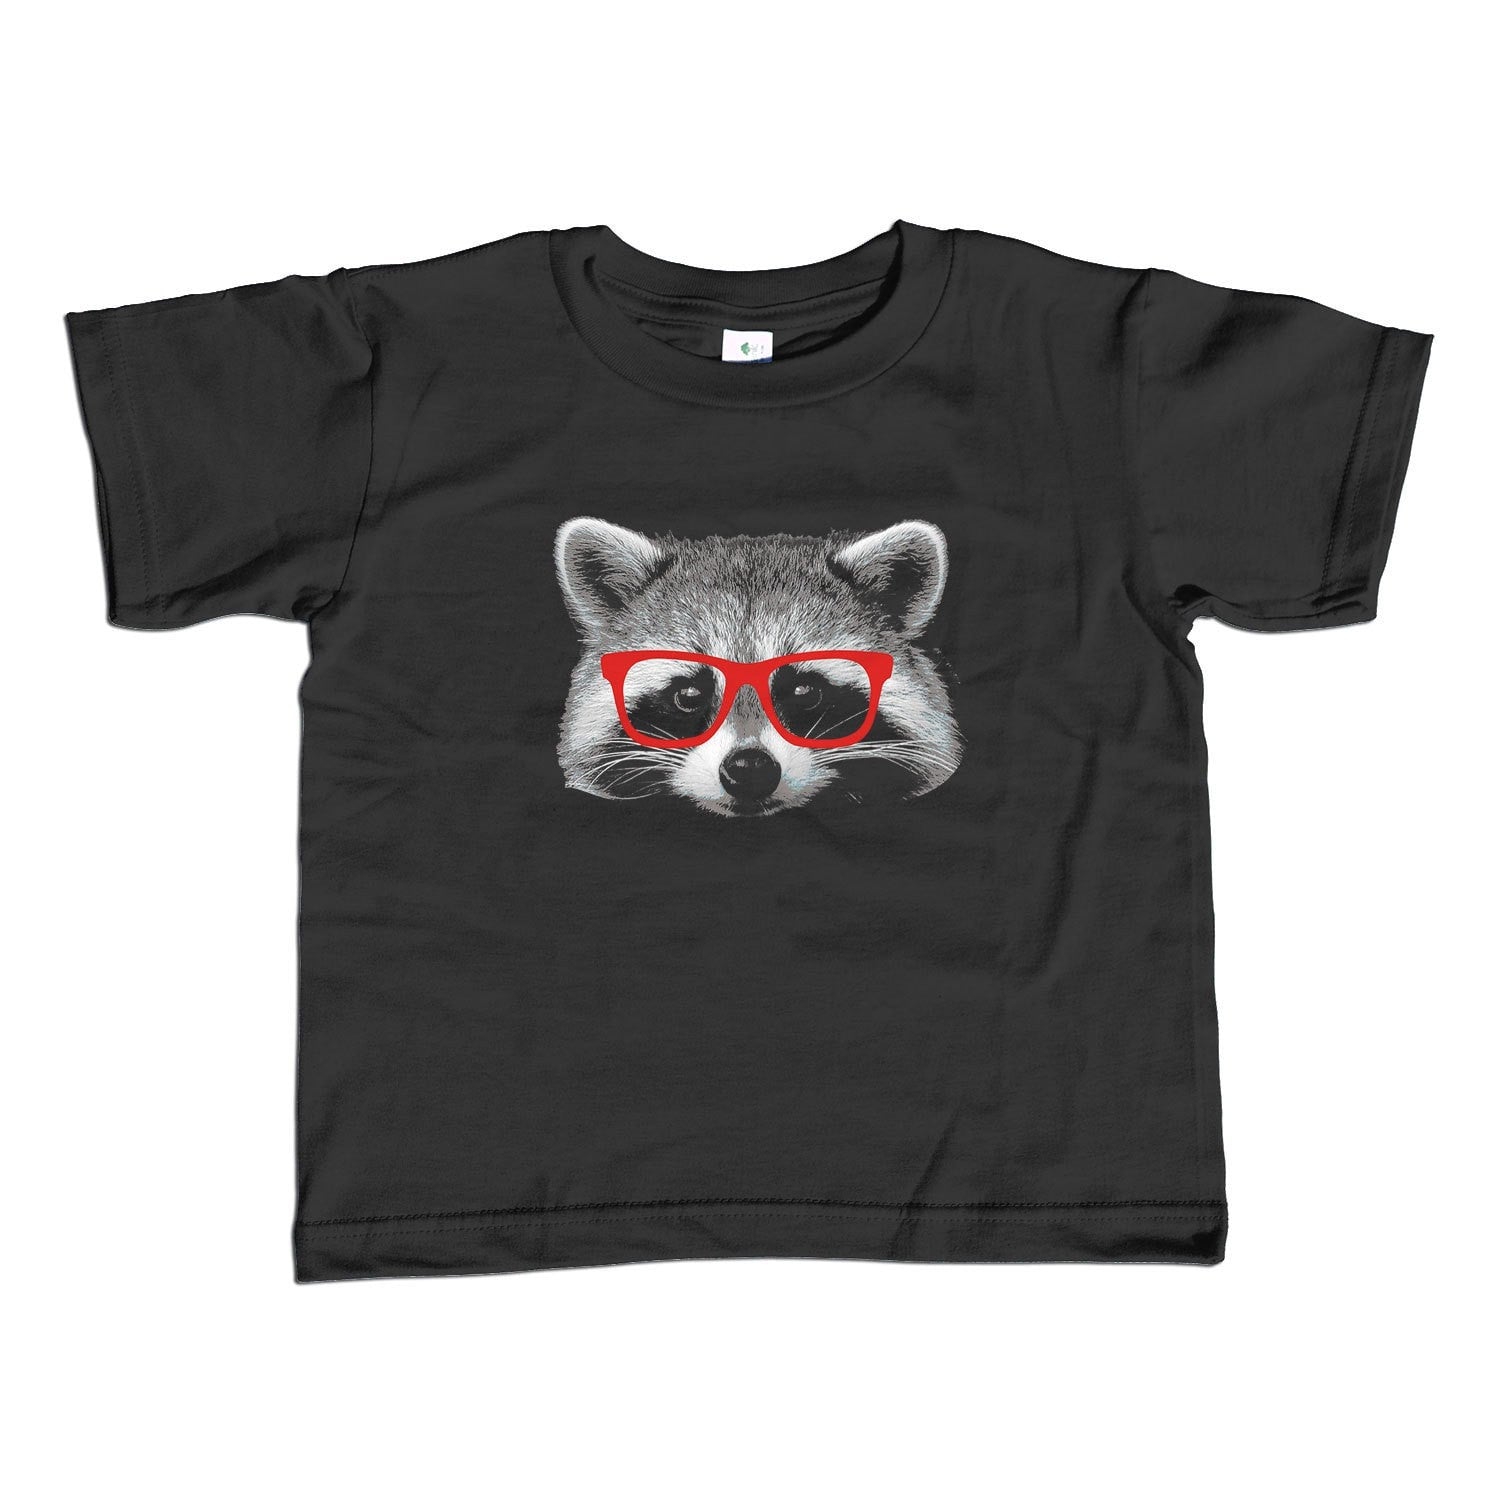 Girl's Glasses on a Raccoon T-Shirt - Unisex Fit Cute Funny Geeky